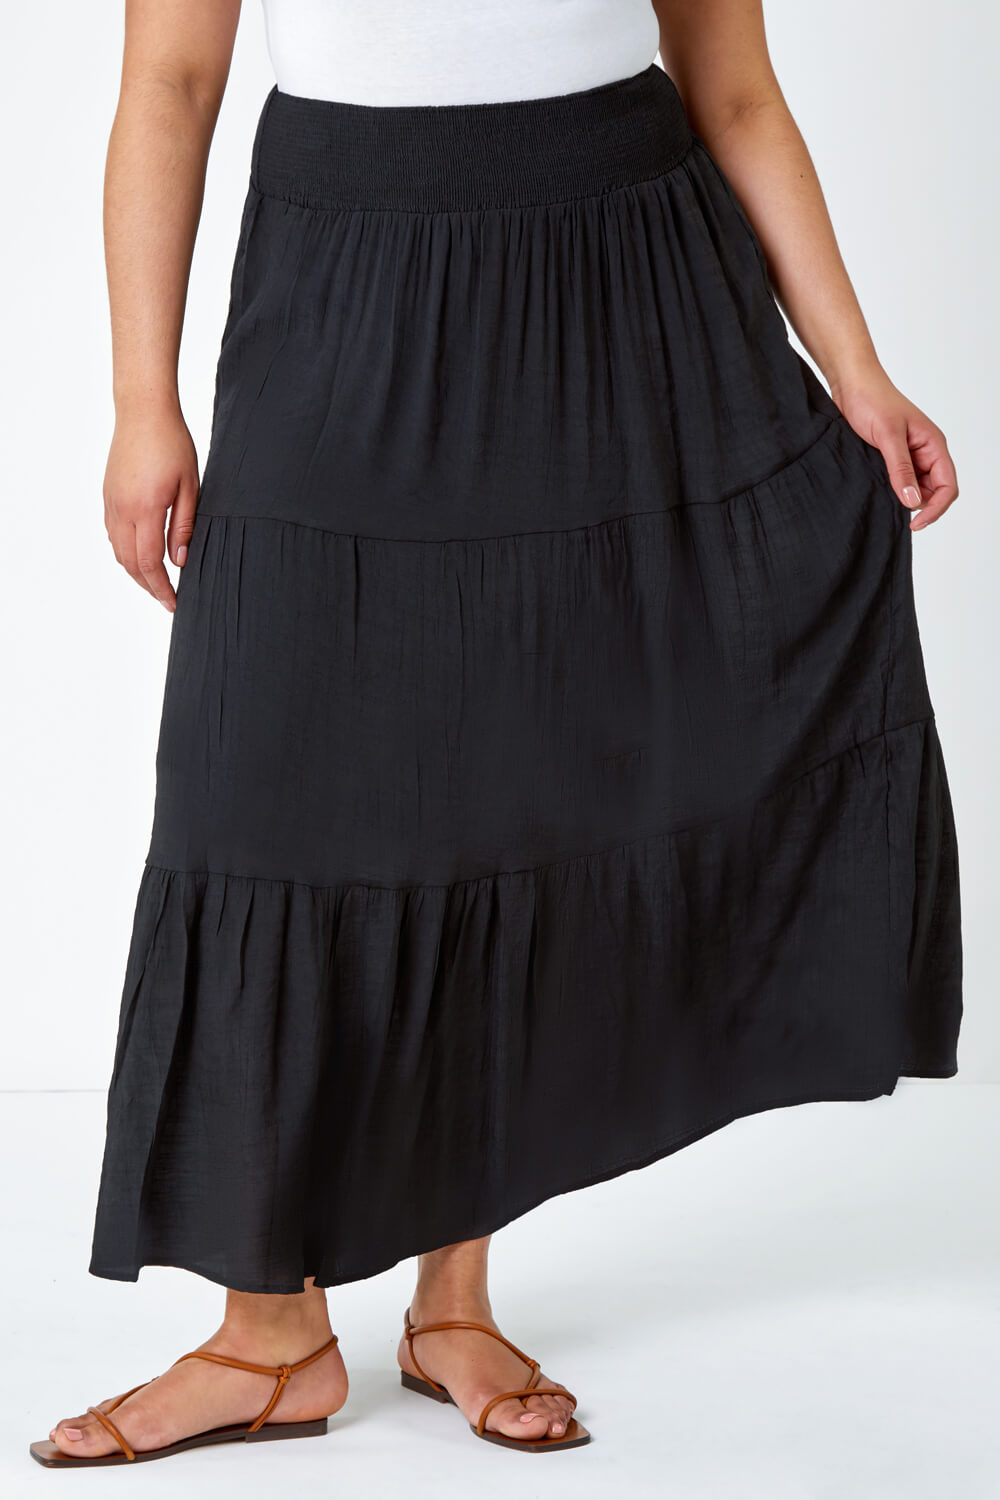 Black Curve Stretch Waist Tiered Maxi Skirt, Image 4 of 5